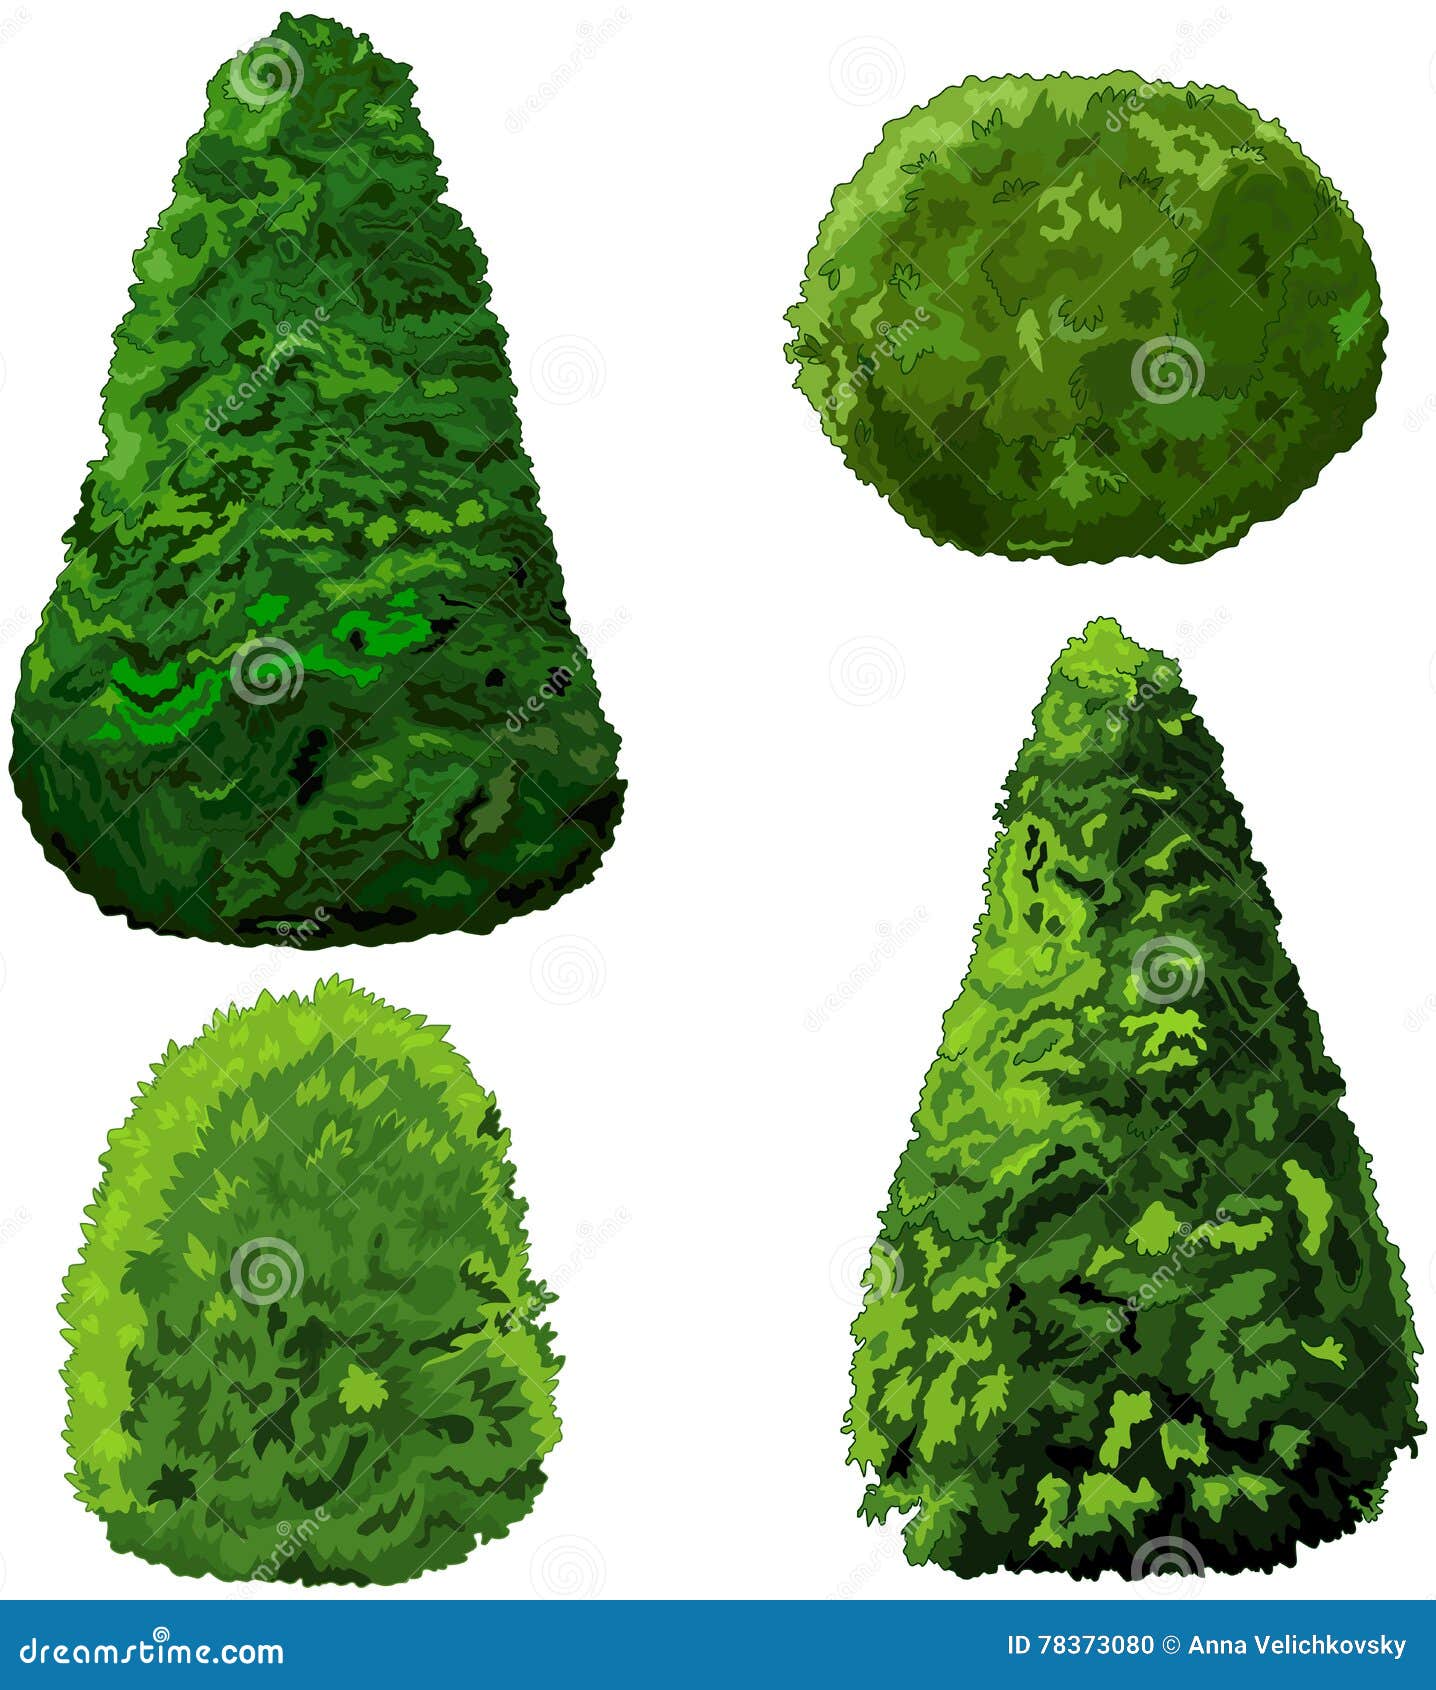 collection of bushes and cypress